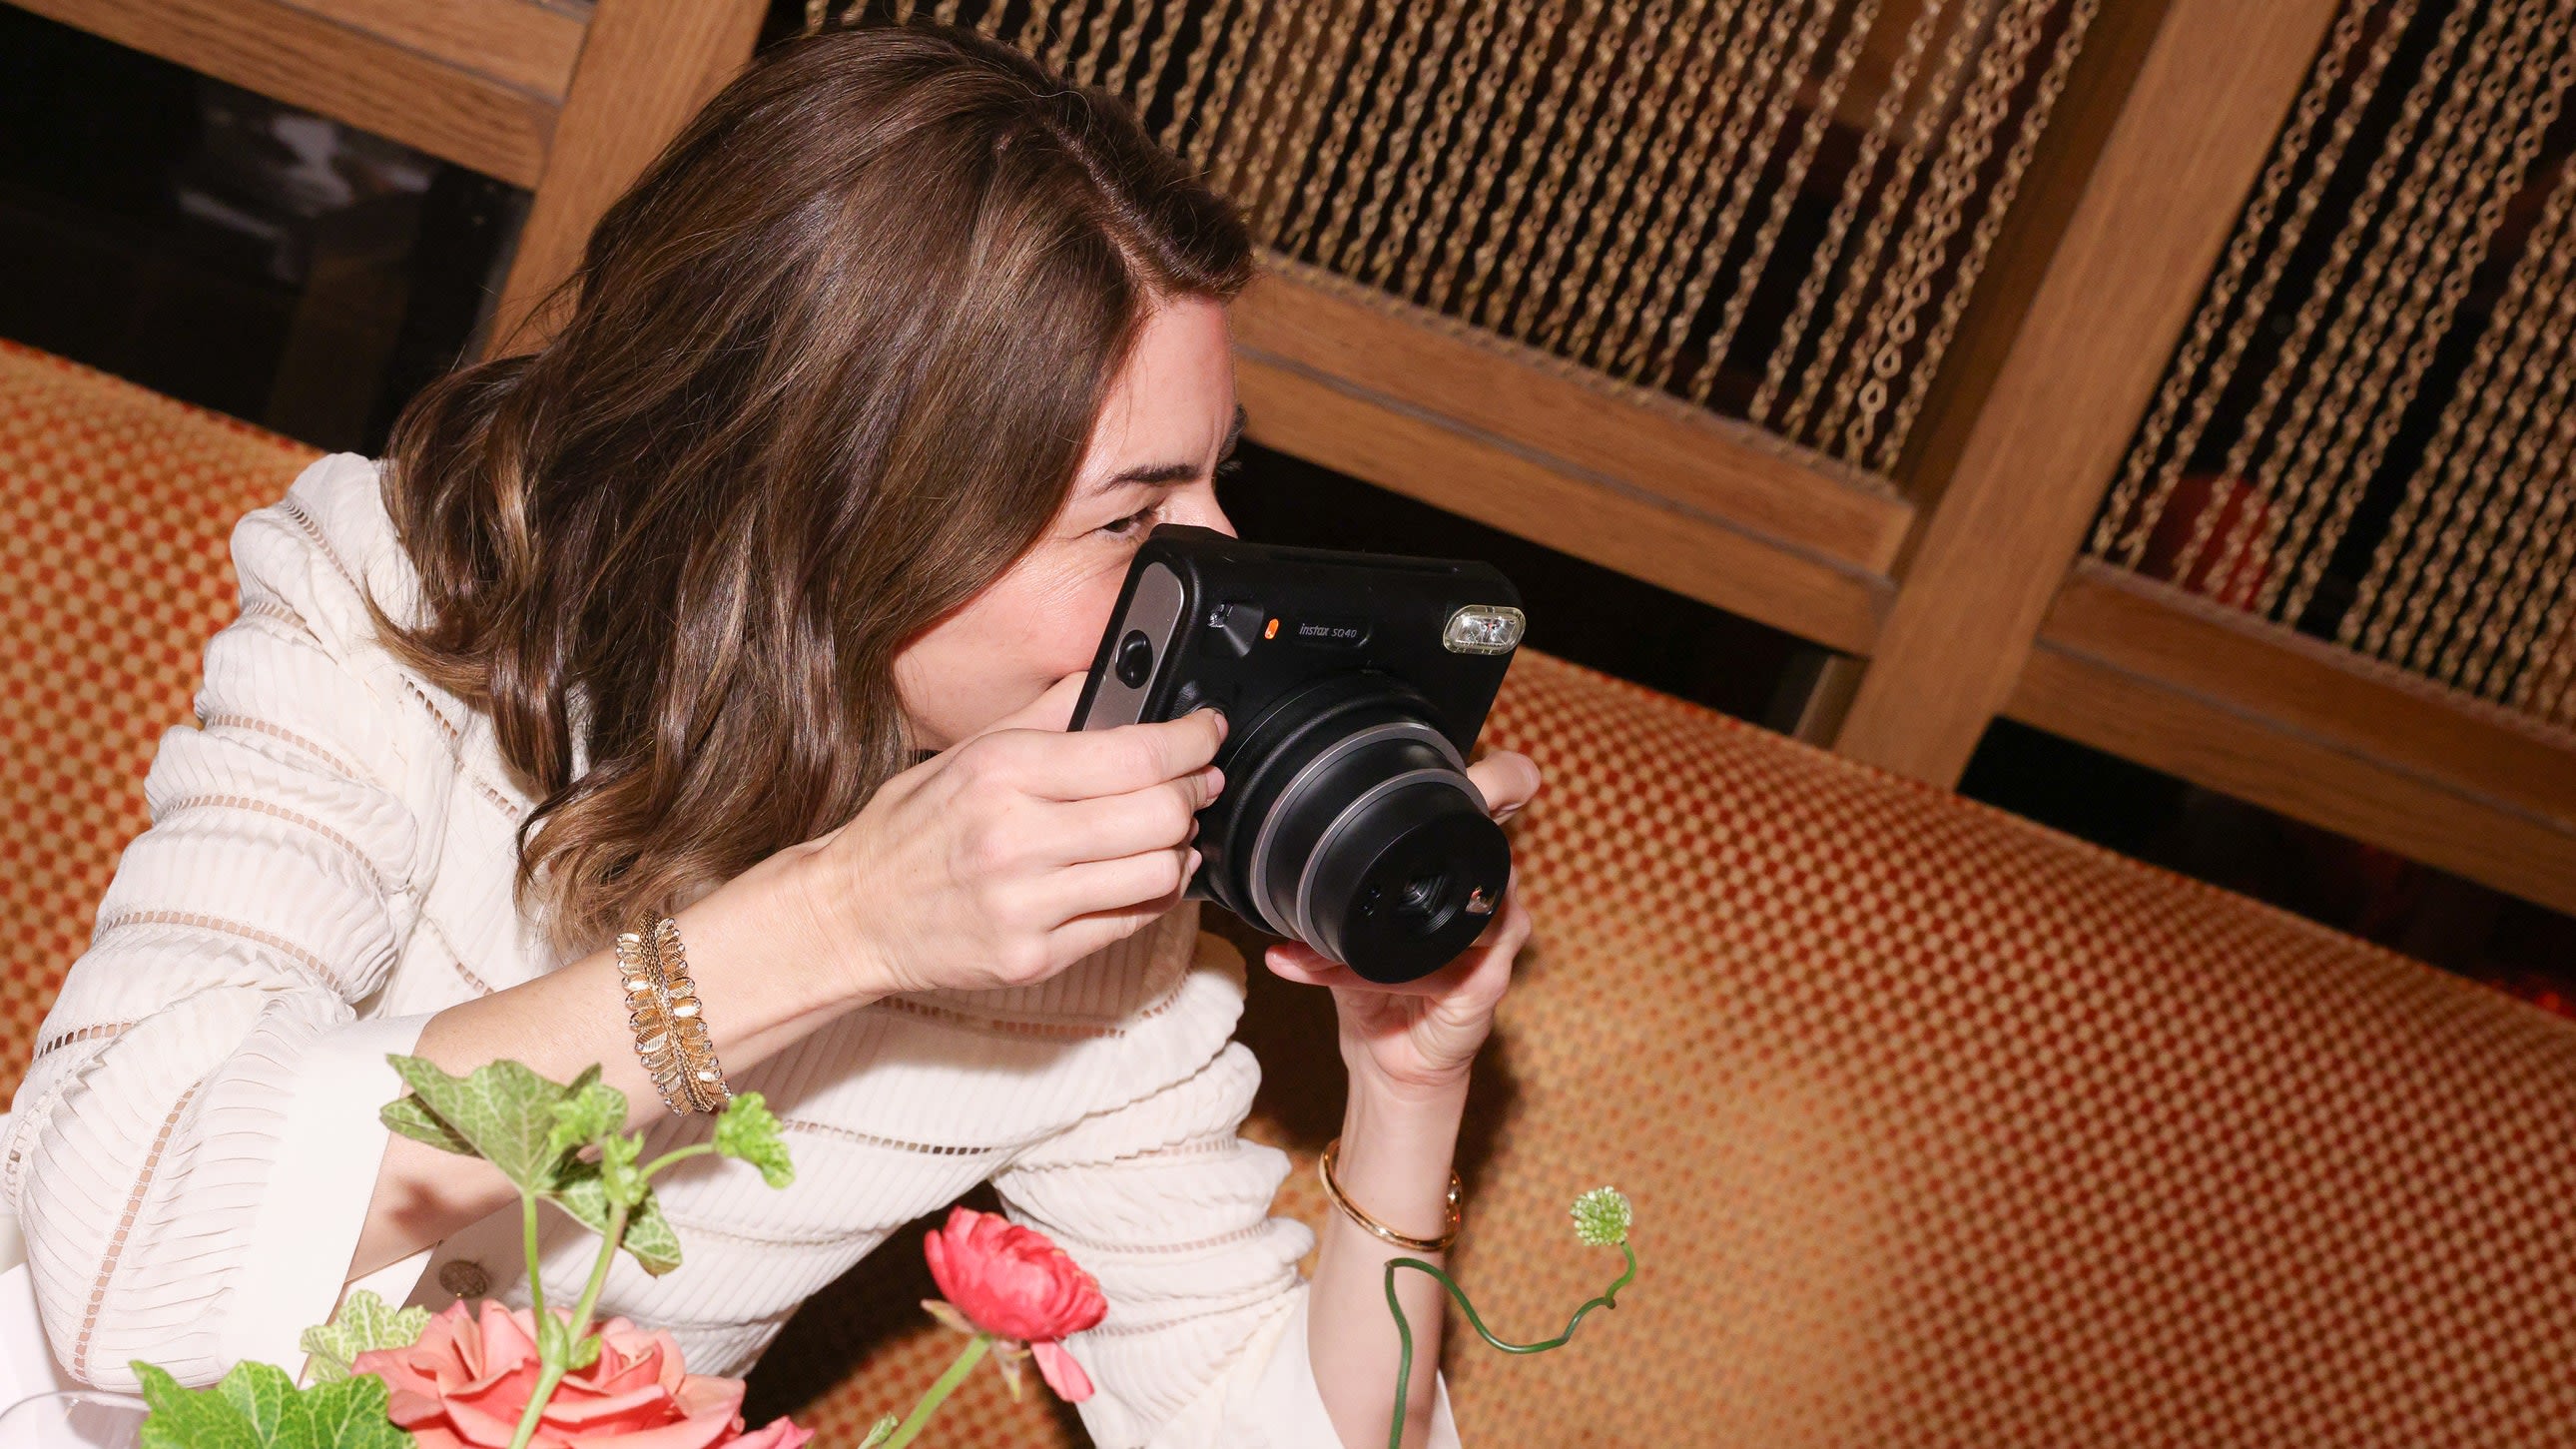 The Stars of Sofia Coppola’s “Fancy and Cozy” Dinner? Tinted Lip Balms and Cool Friends